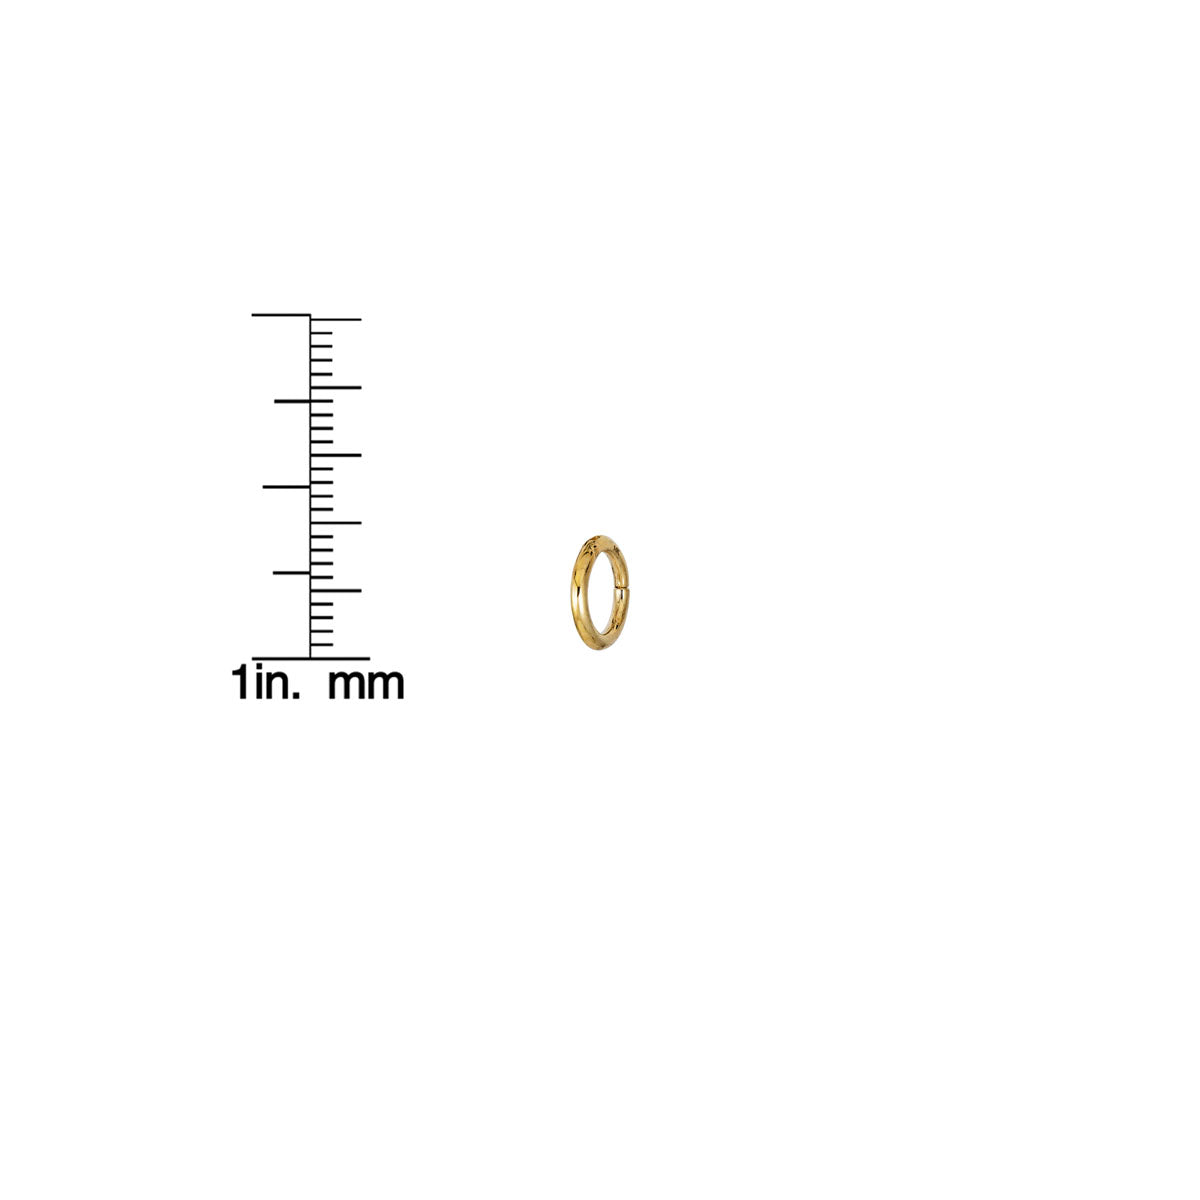 8mm infinity gold hoop earring with ruler_fa73d25a f22d 4e18 a328 f0827df09a5e